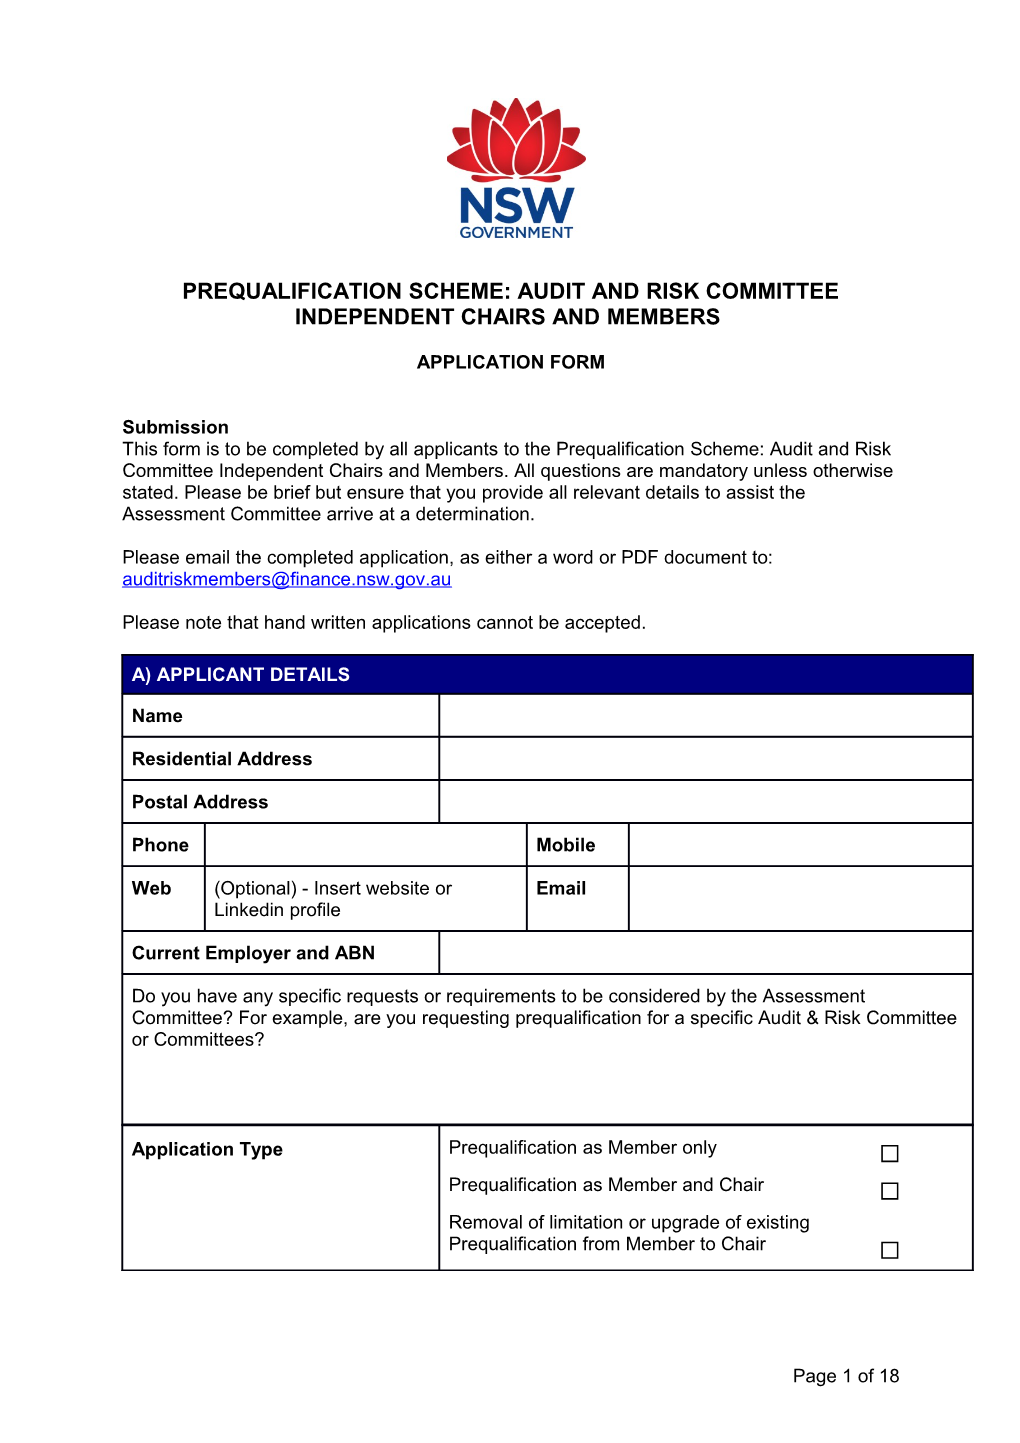 Prequalification Scheme: Audit and Risk Committee Independent Chairs and Members